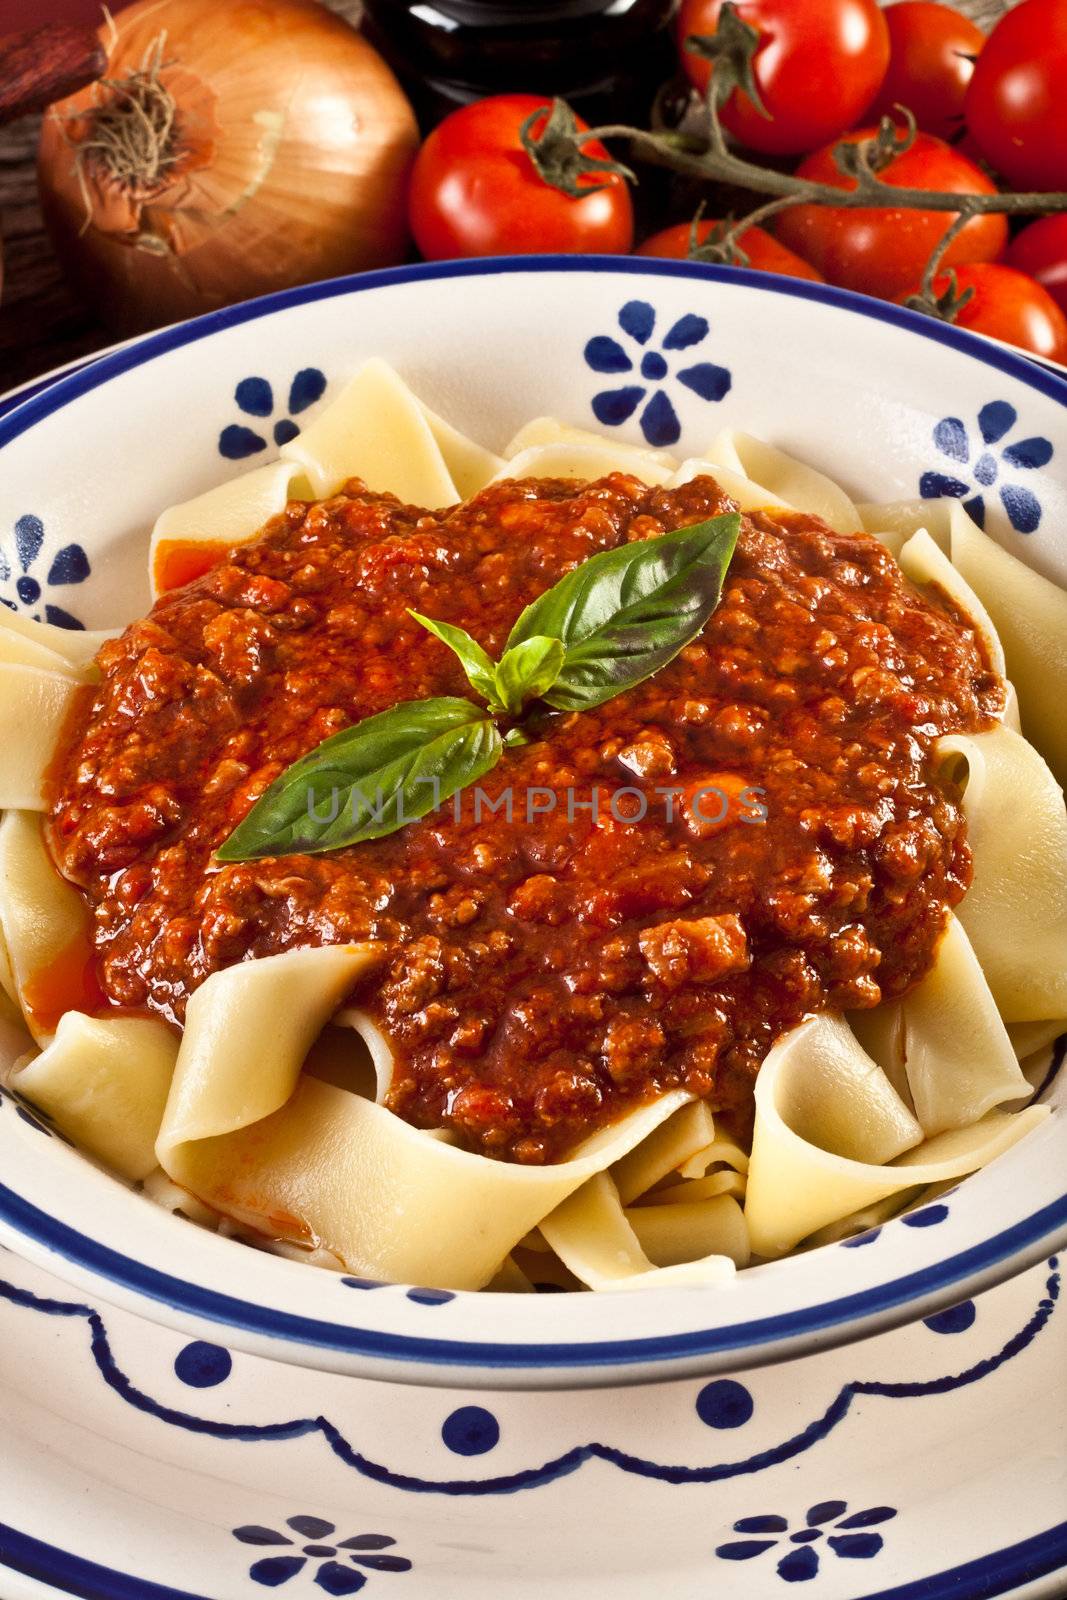 tagliatelle bolognsese - meat sauce and basil